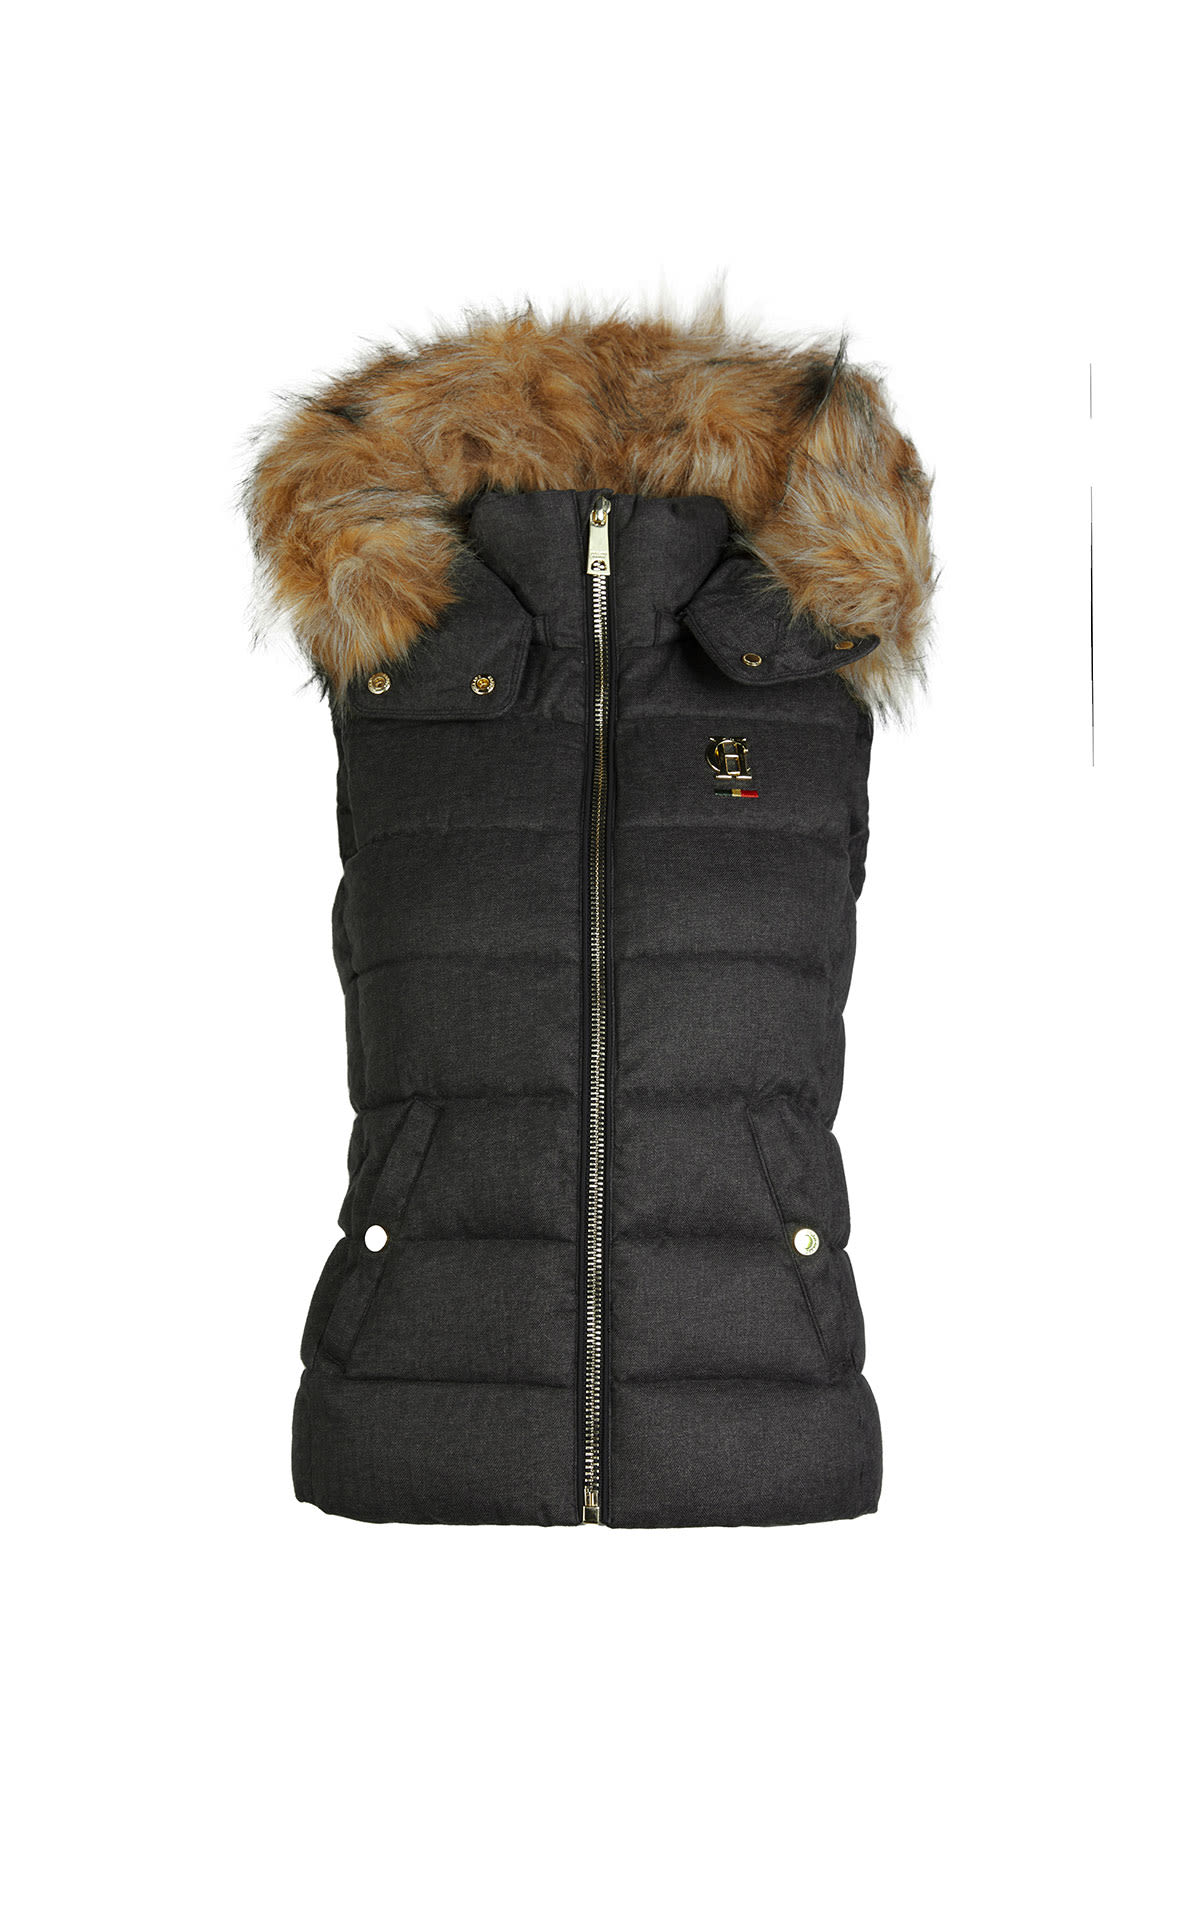 Holland Cooper Heritage faux fur gilet from Bicester Village